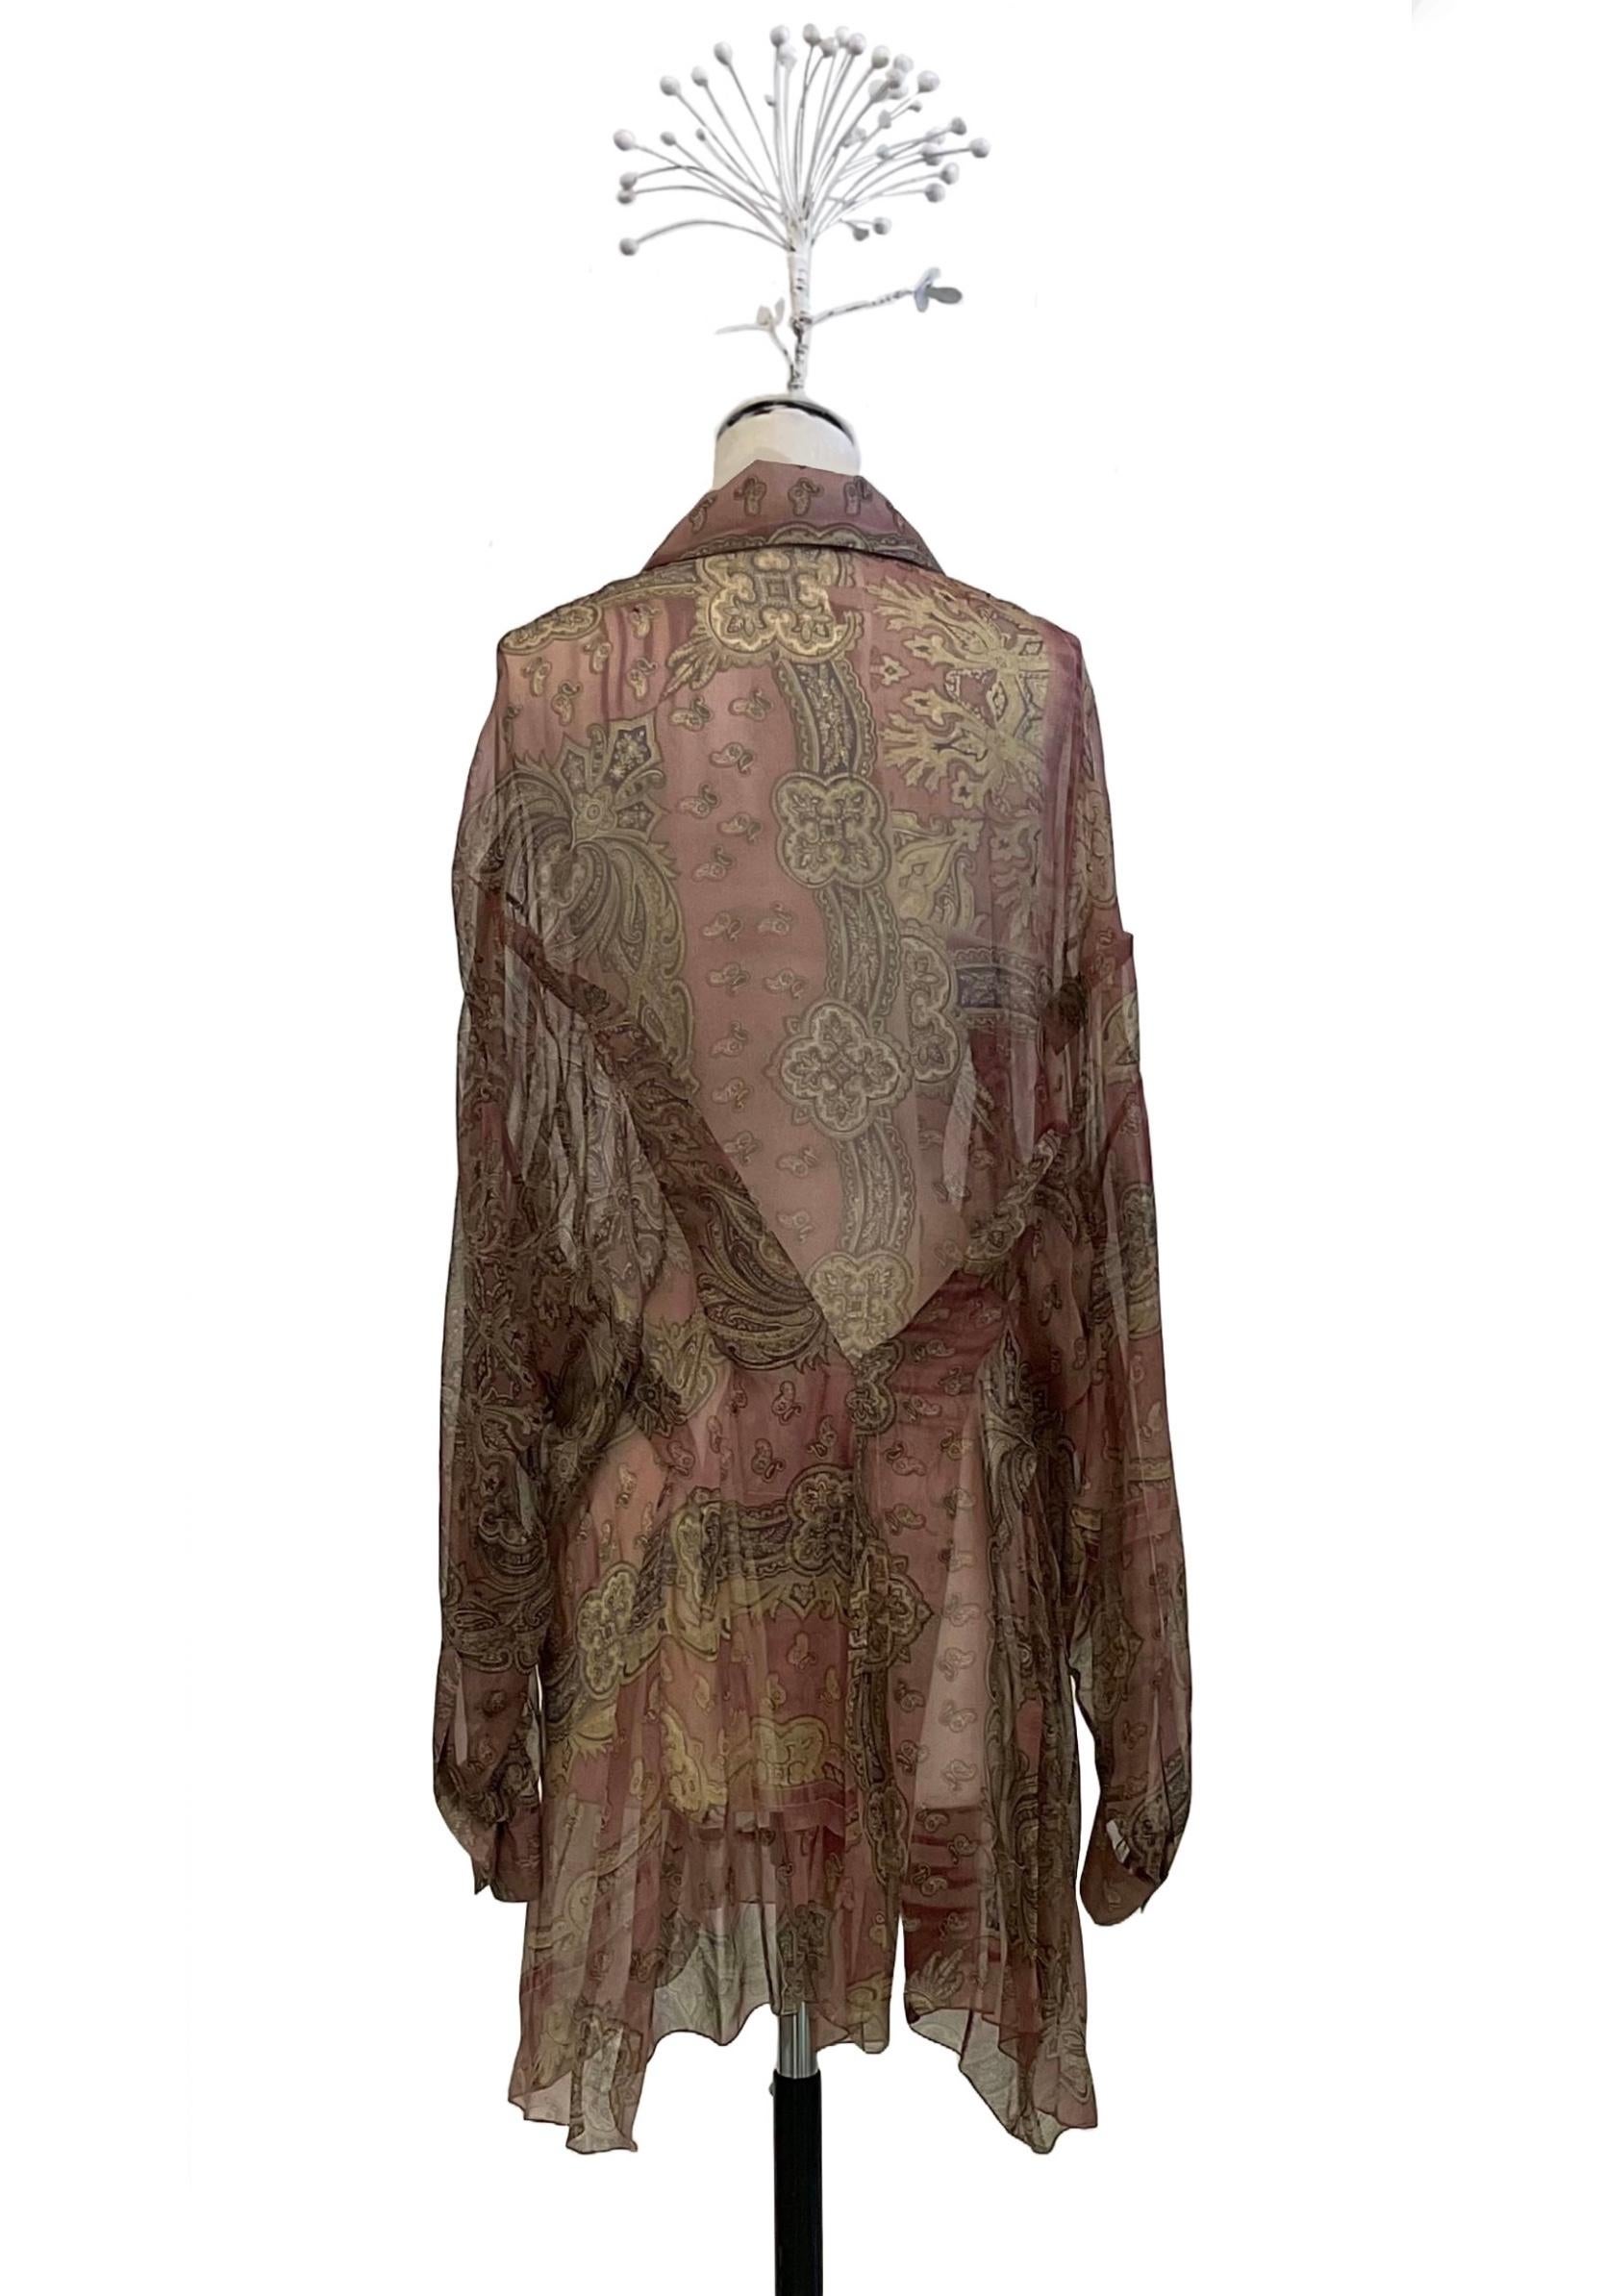 100% silk chiffon shirt printed with paisley pattern by John
Galliano from the Ready to Wear Fall Winter 2006 collection .
The shirt has an over fit and is slightly shorter
front than the back.
It is closed by two-hole mother-of-pearl buttons.
The